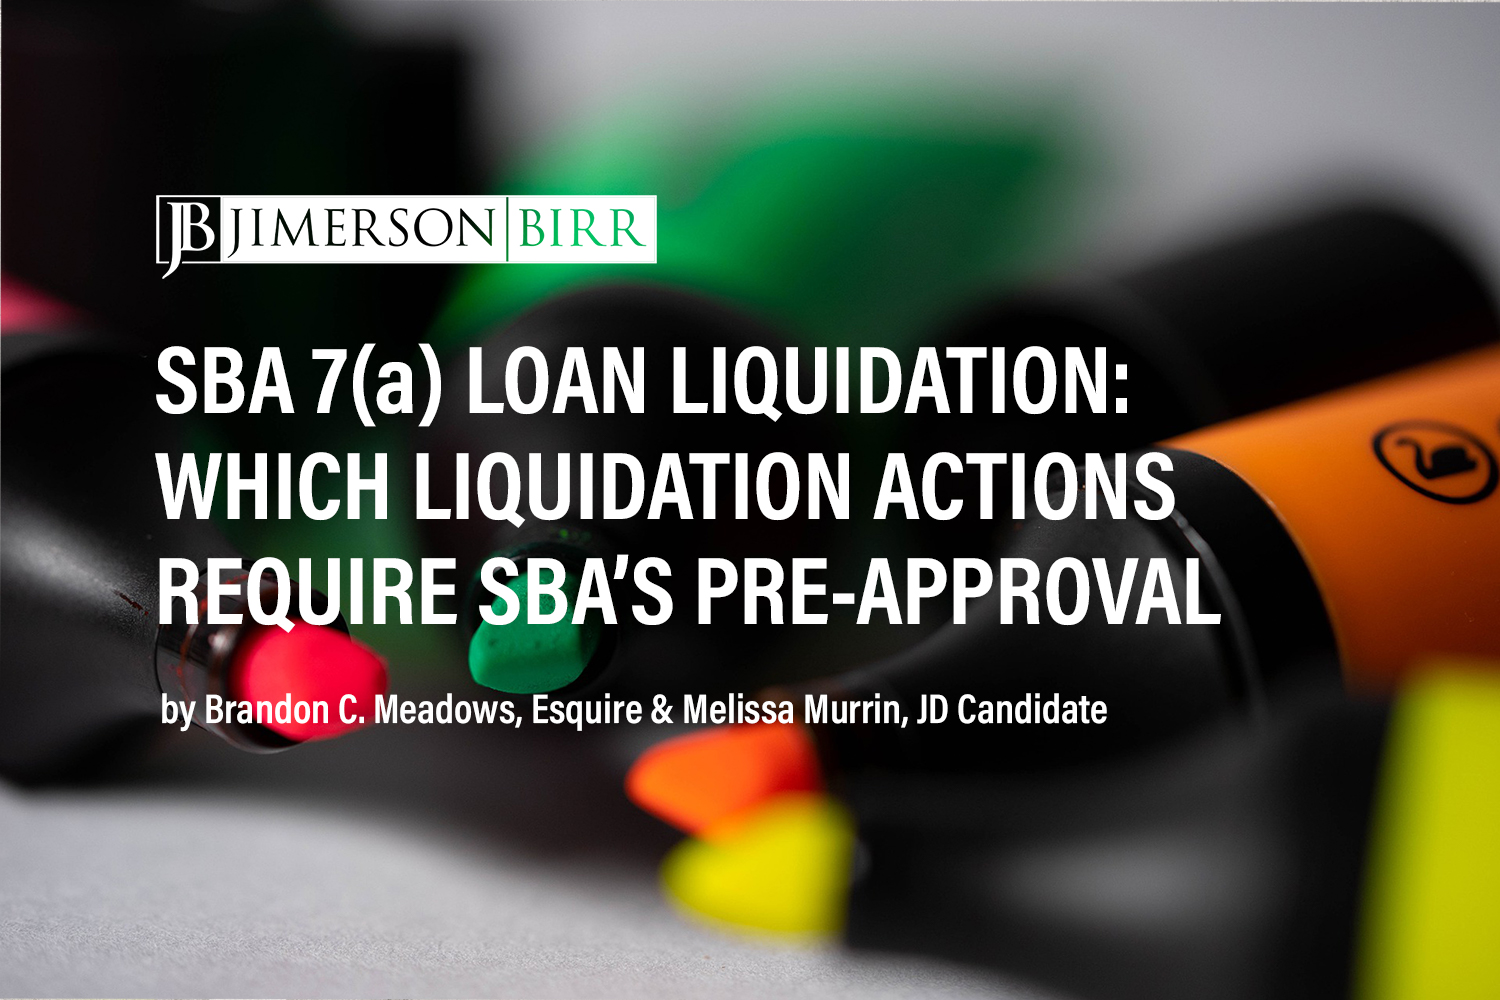 SBA 7(a) Loan Liquidation: Which Liquidation Actions Require SBA’s Pre-Approval (Part 1)